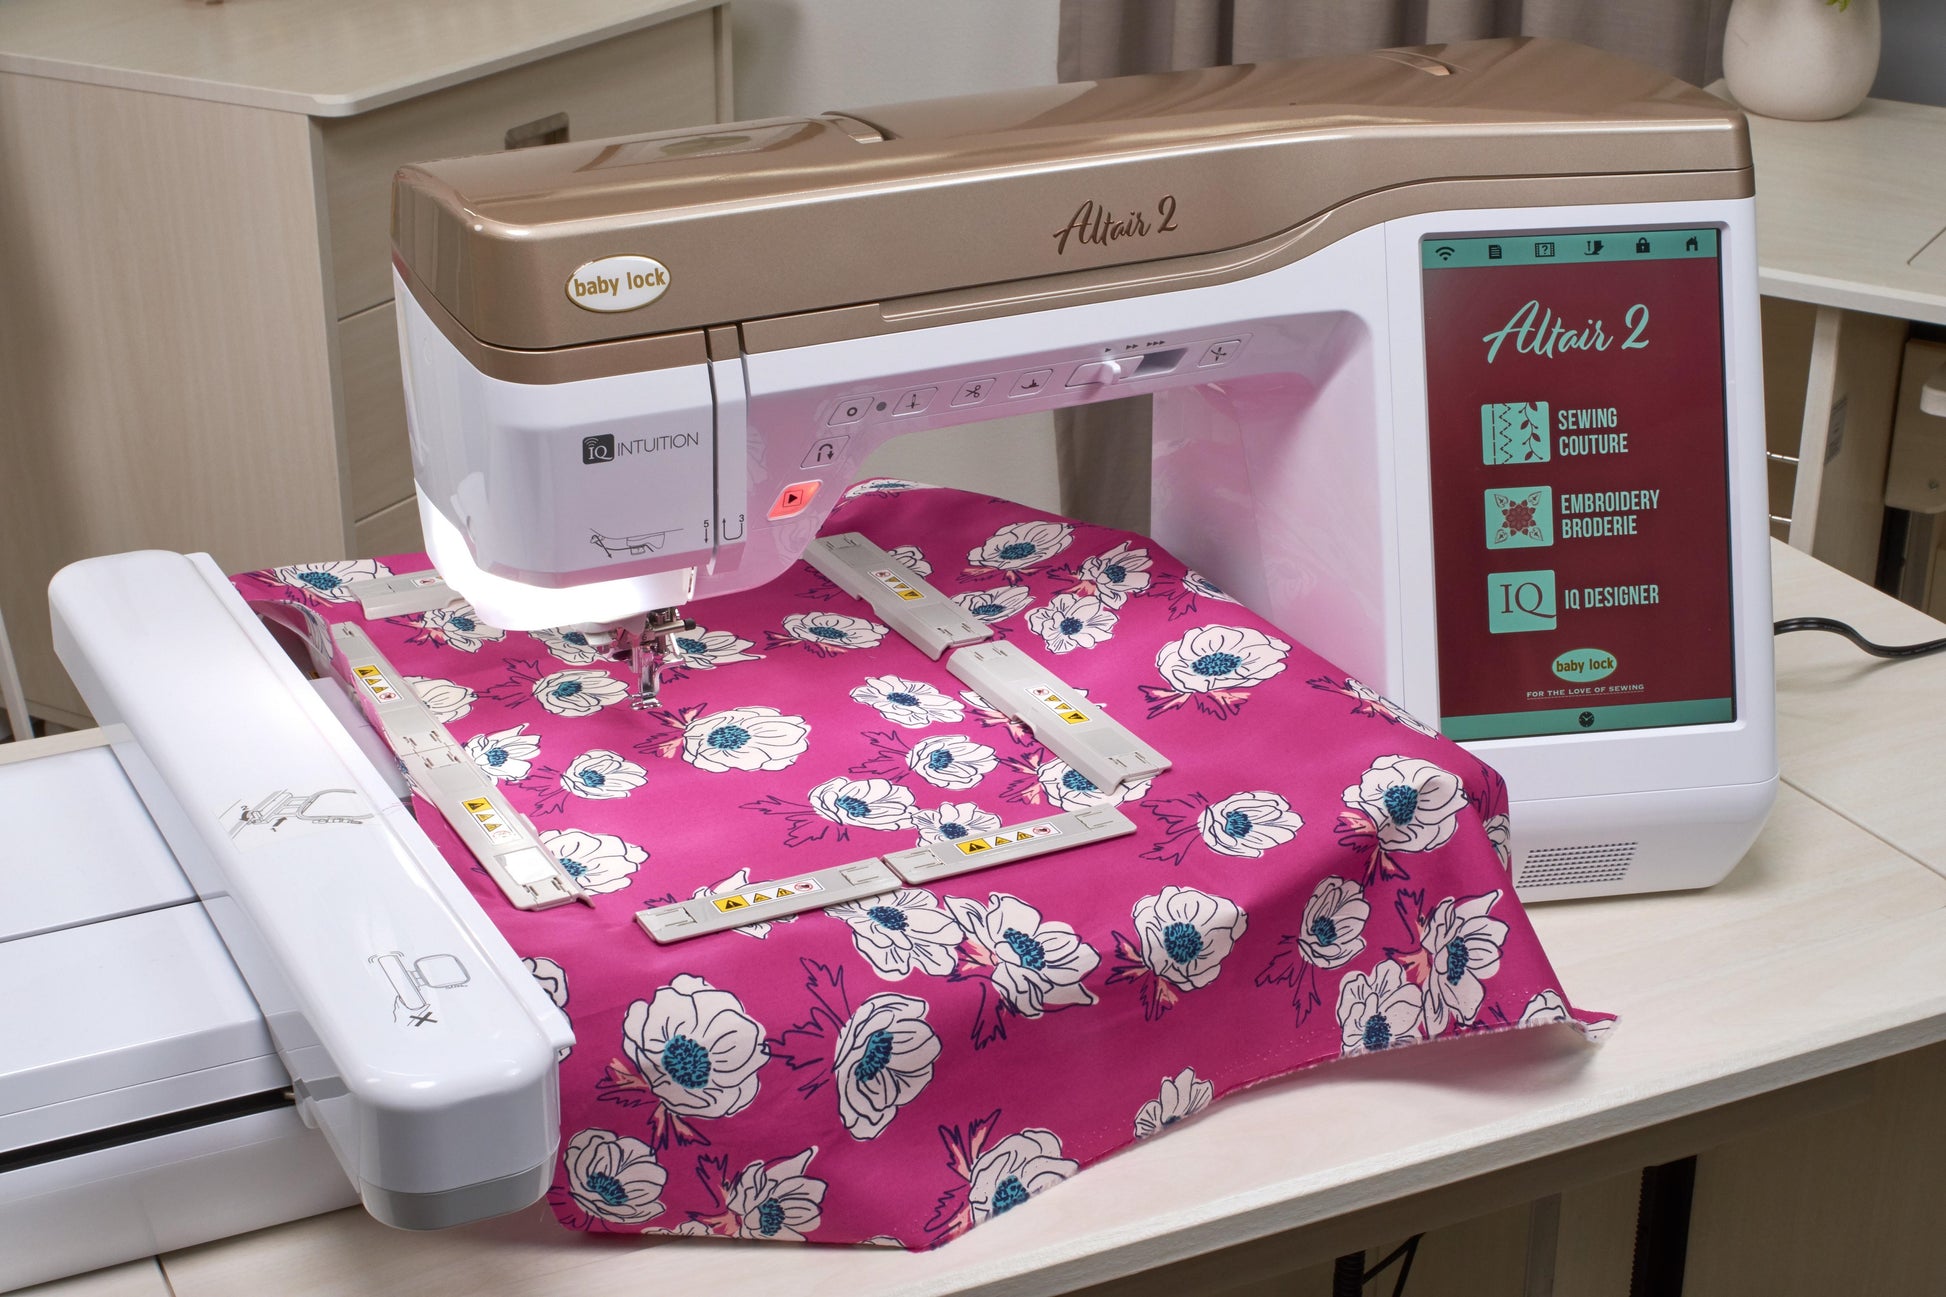 Baby Lock Aventura  Embroidery and Sewing Machine